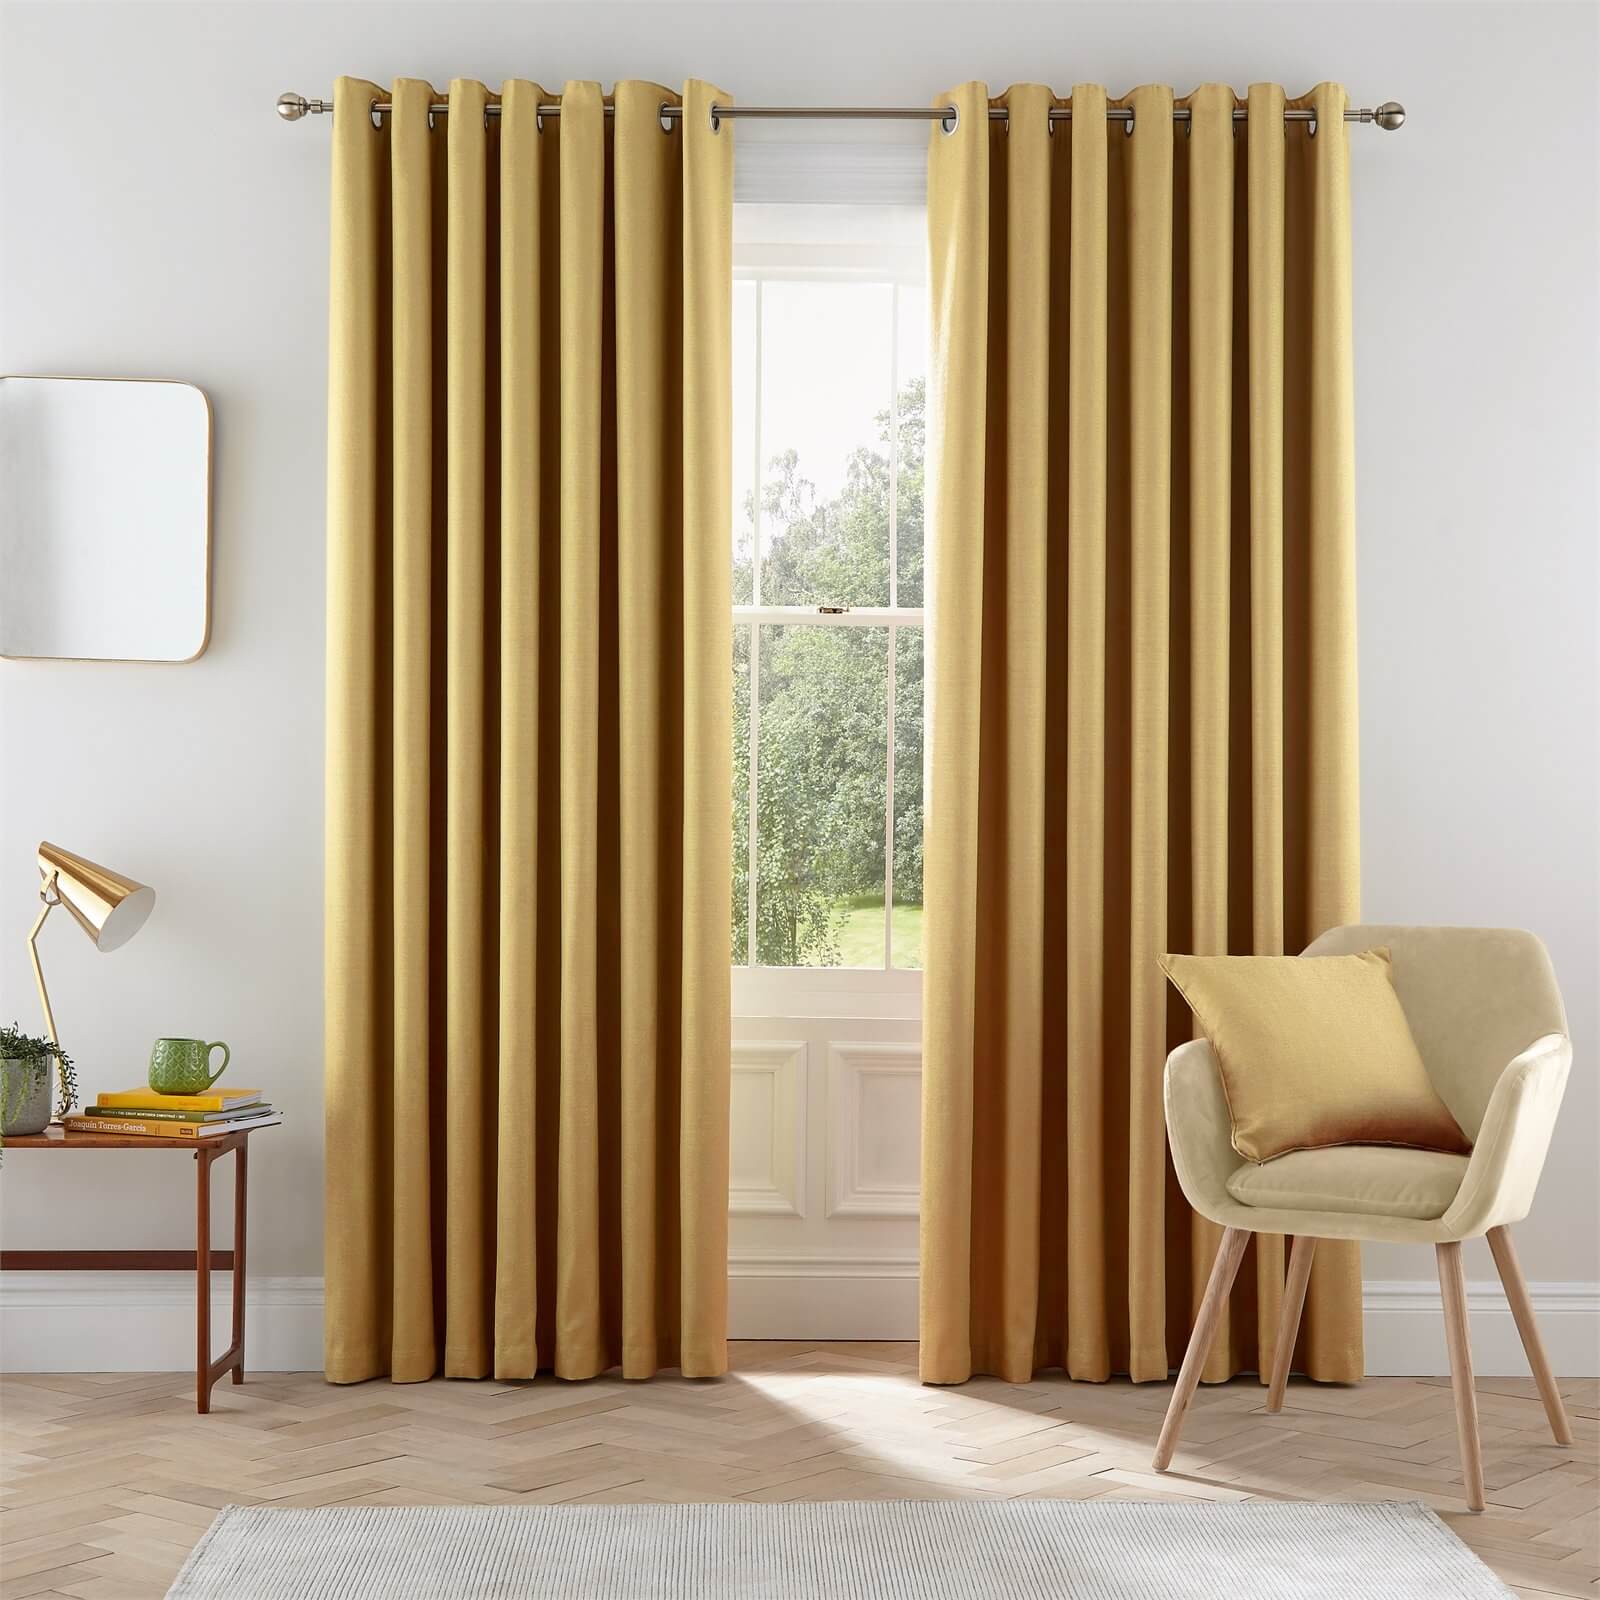 Helena Springfield Eden Lined Curtains 90 x 90 - Chartreuse